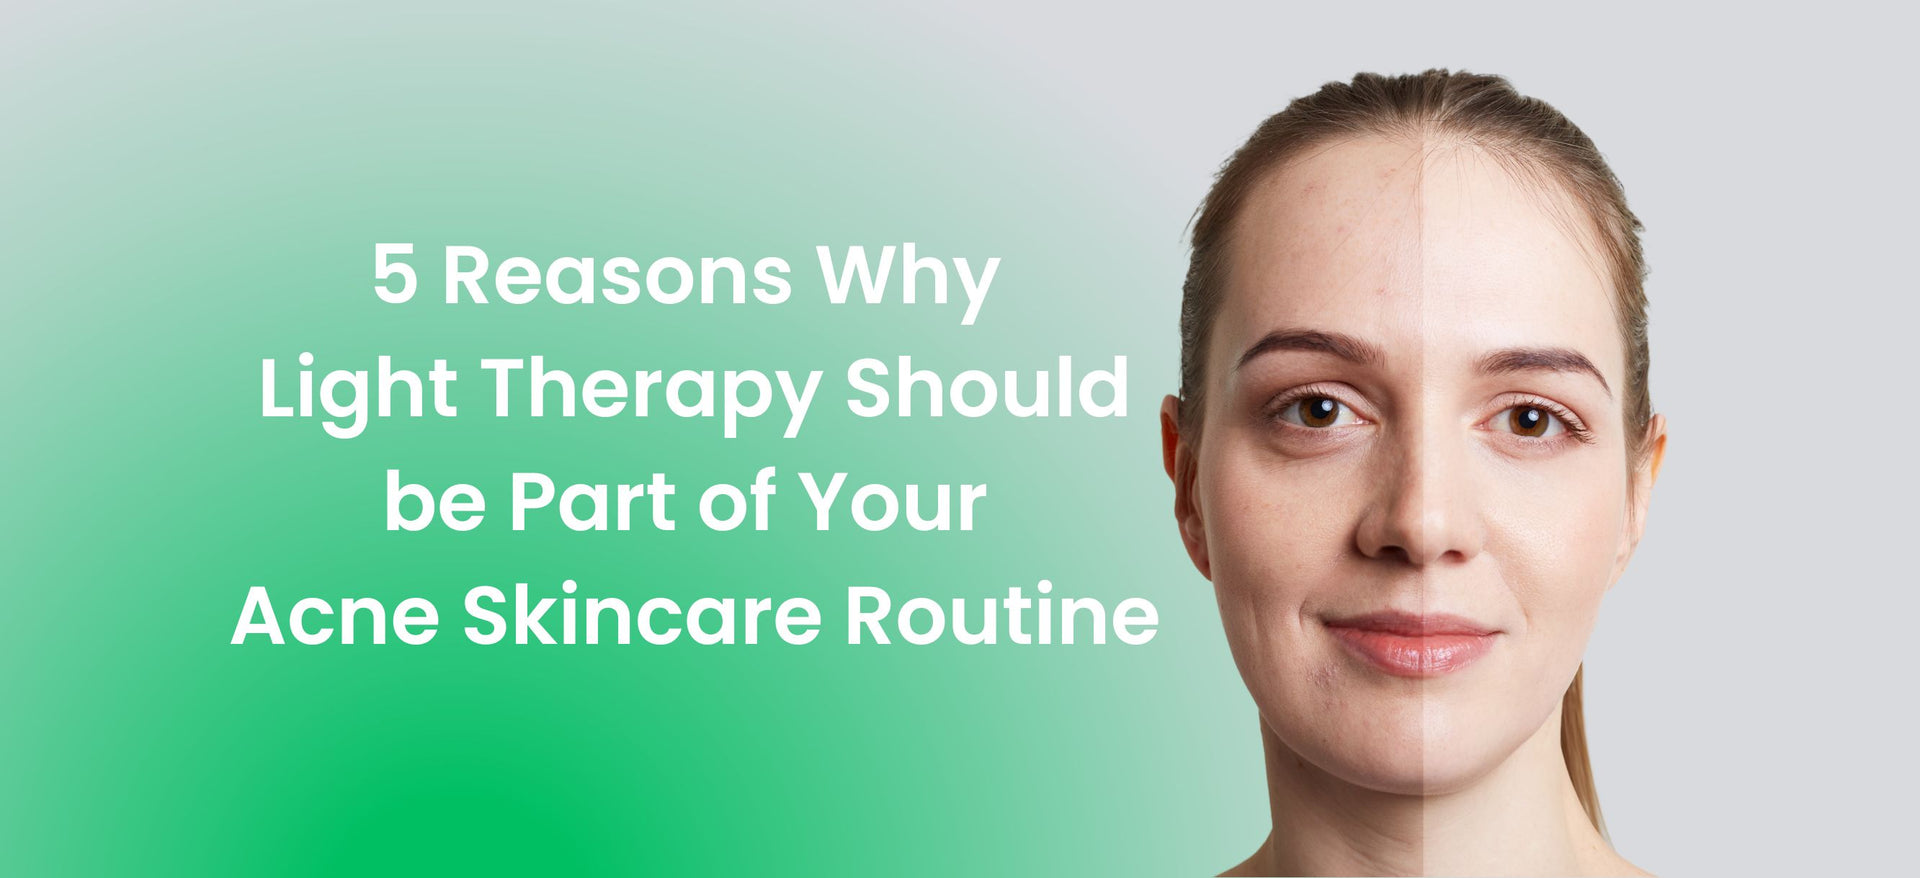 5 Reasons Why Light Therapy Should be Part of Your Acne Skincare Routine